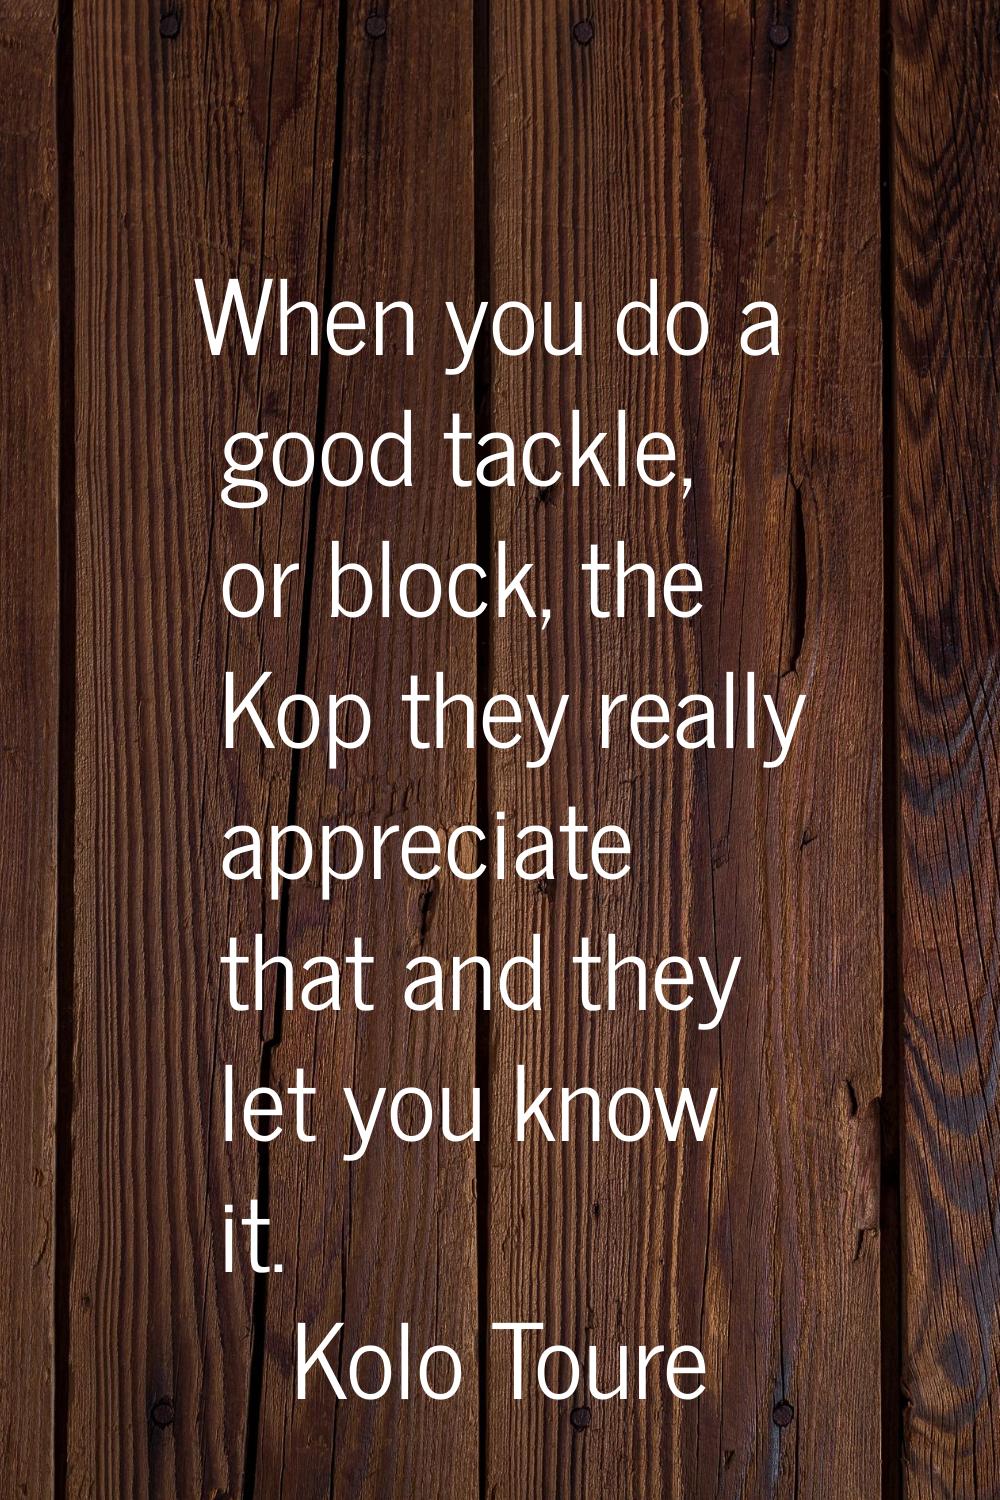 When you do a good tackle, or block, the Kop they really appreciate that and they let you know it.